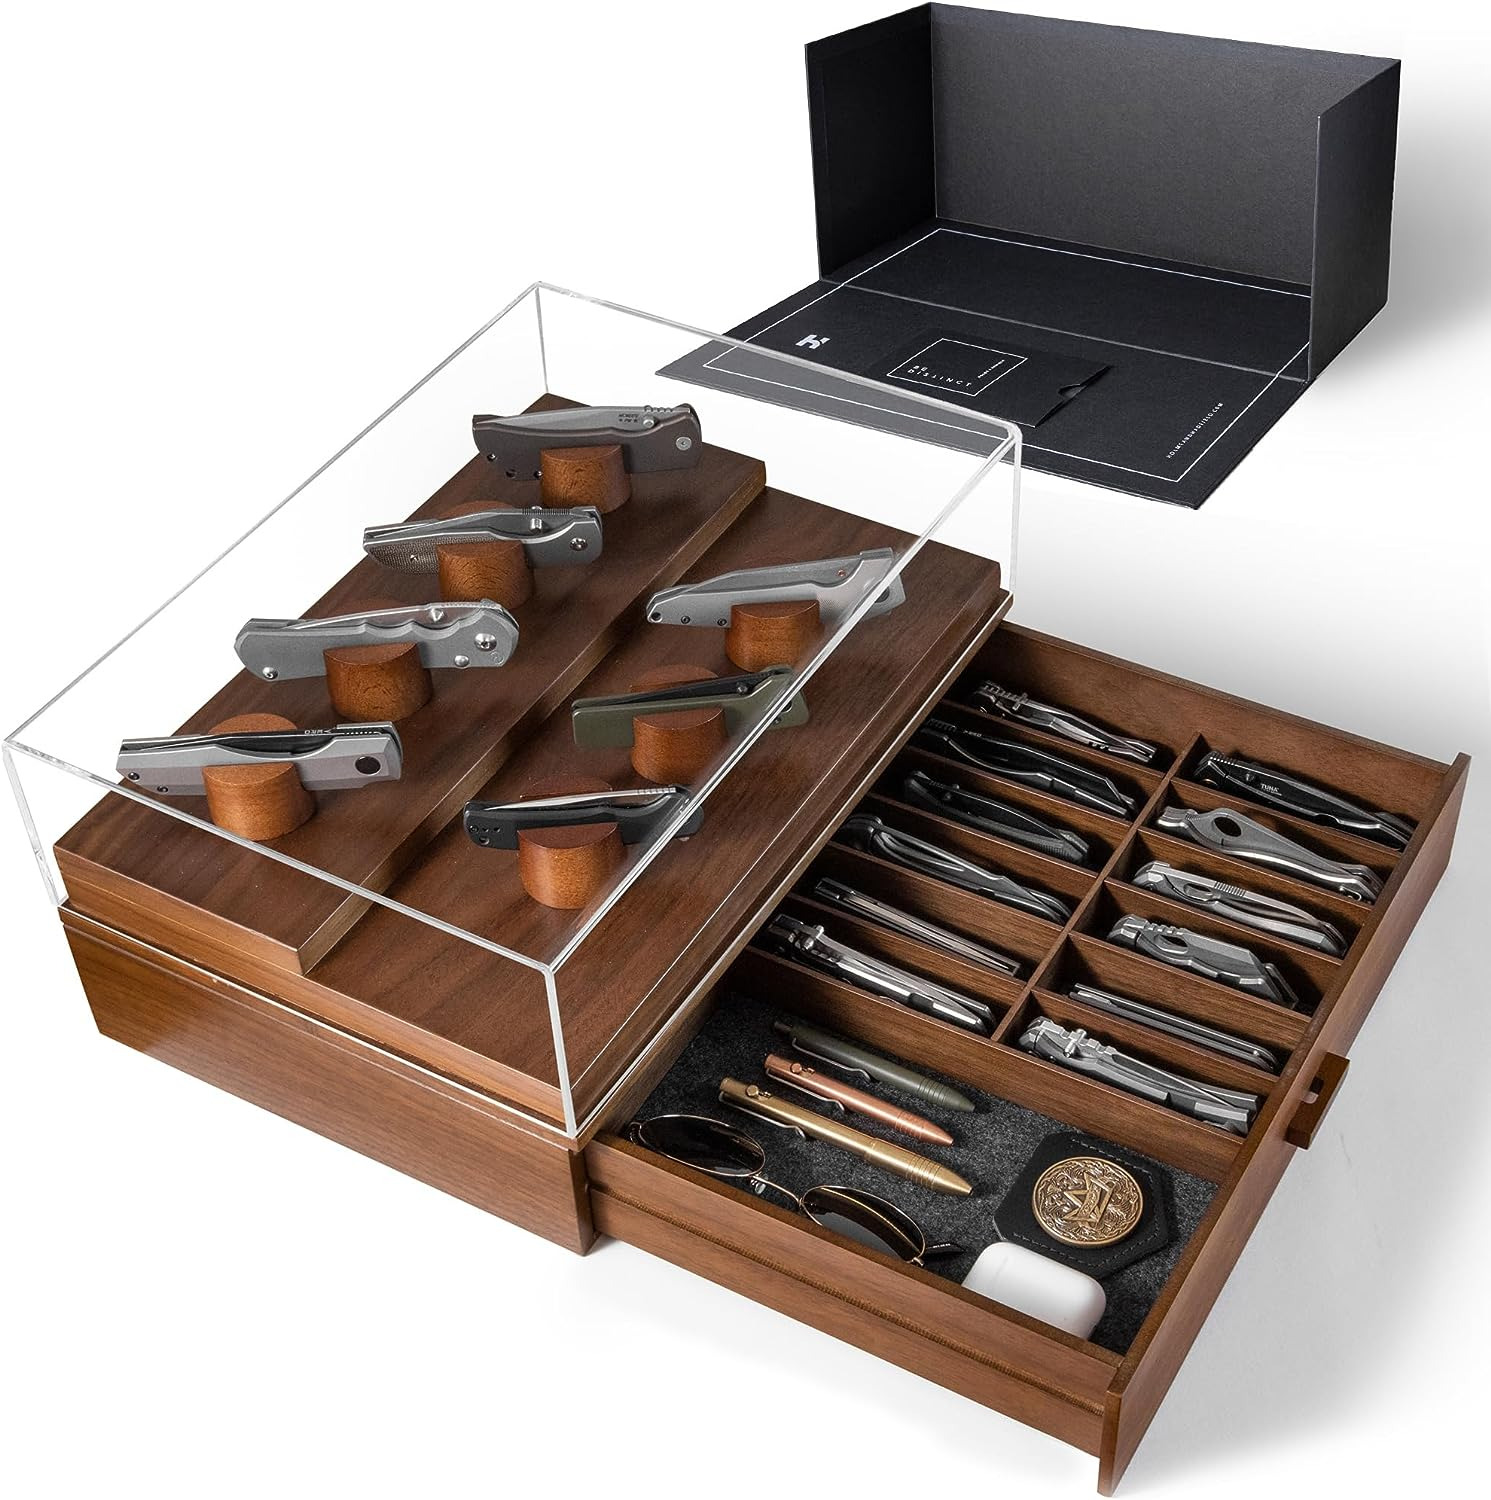 Display Your Knife Collection with the Armory – Premium Pocket Knife Display Cas